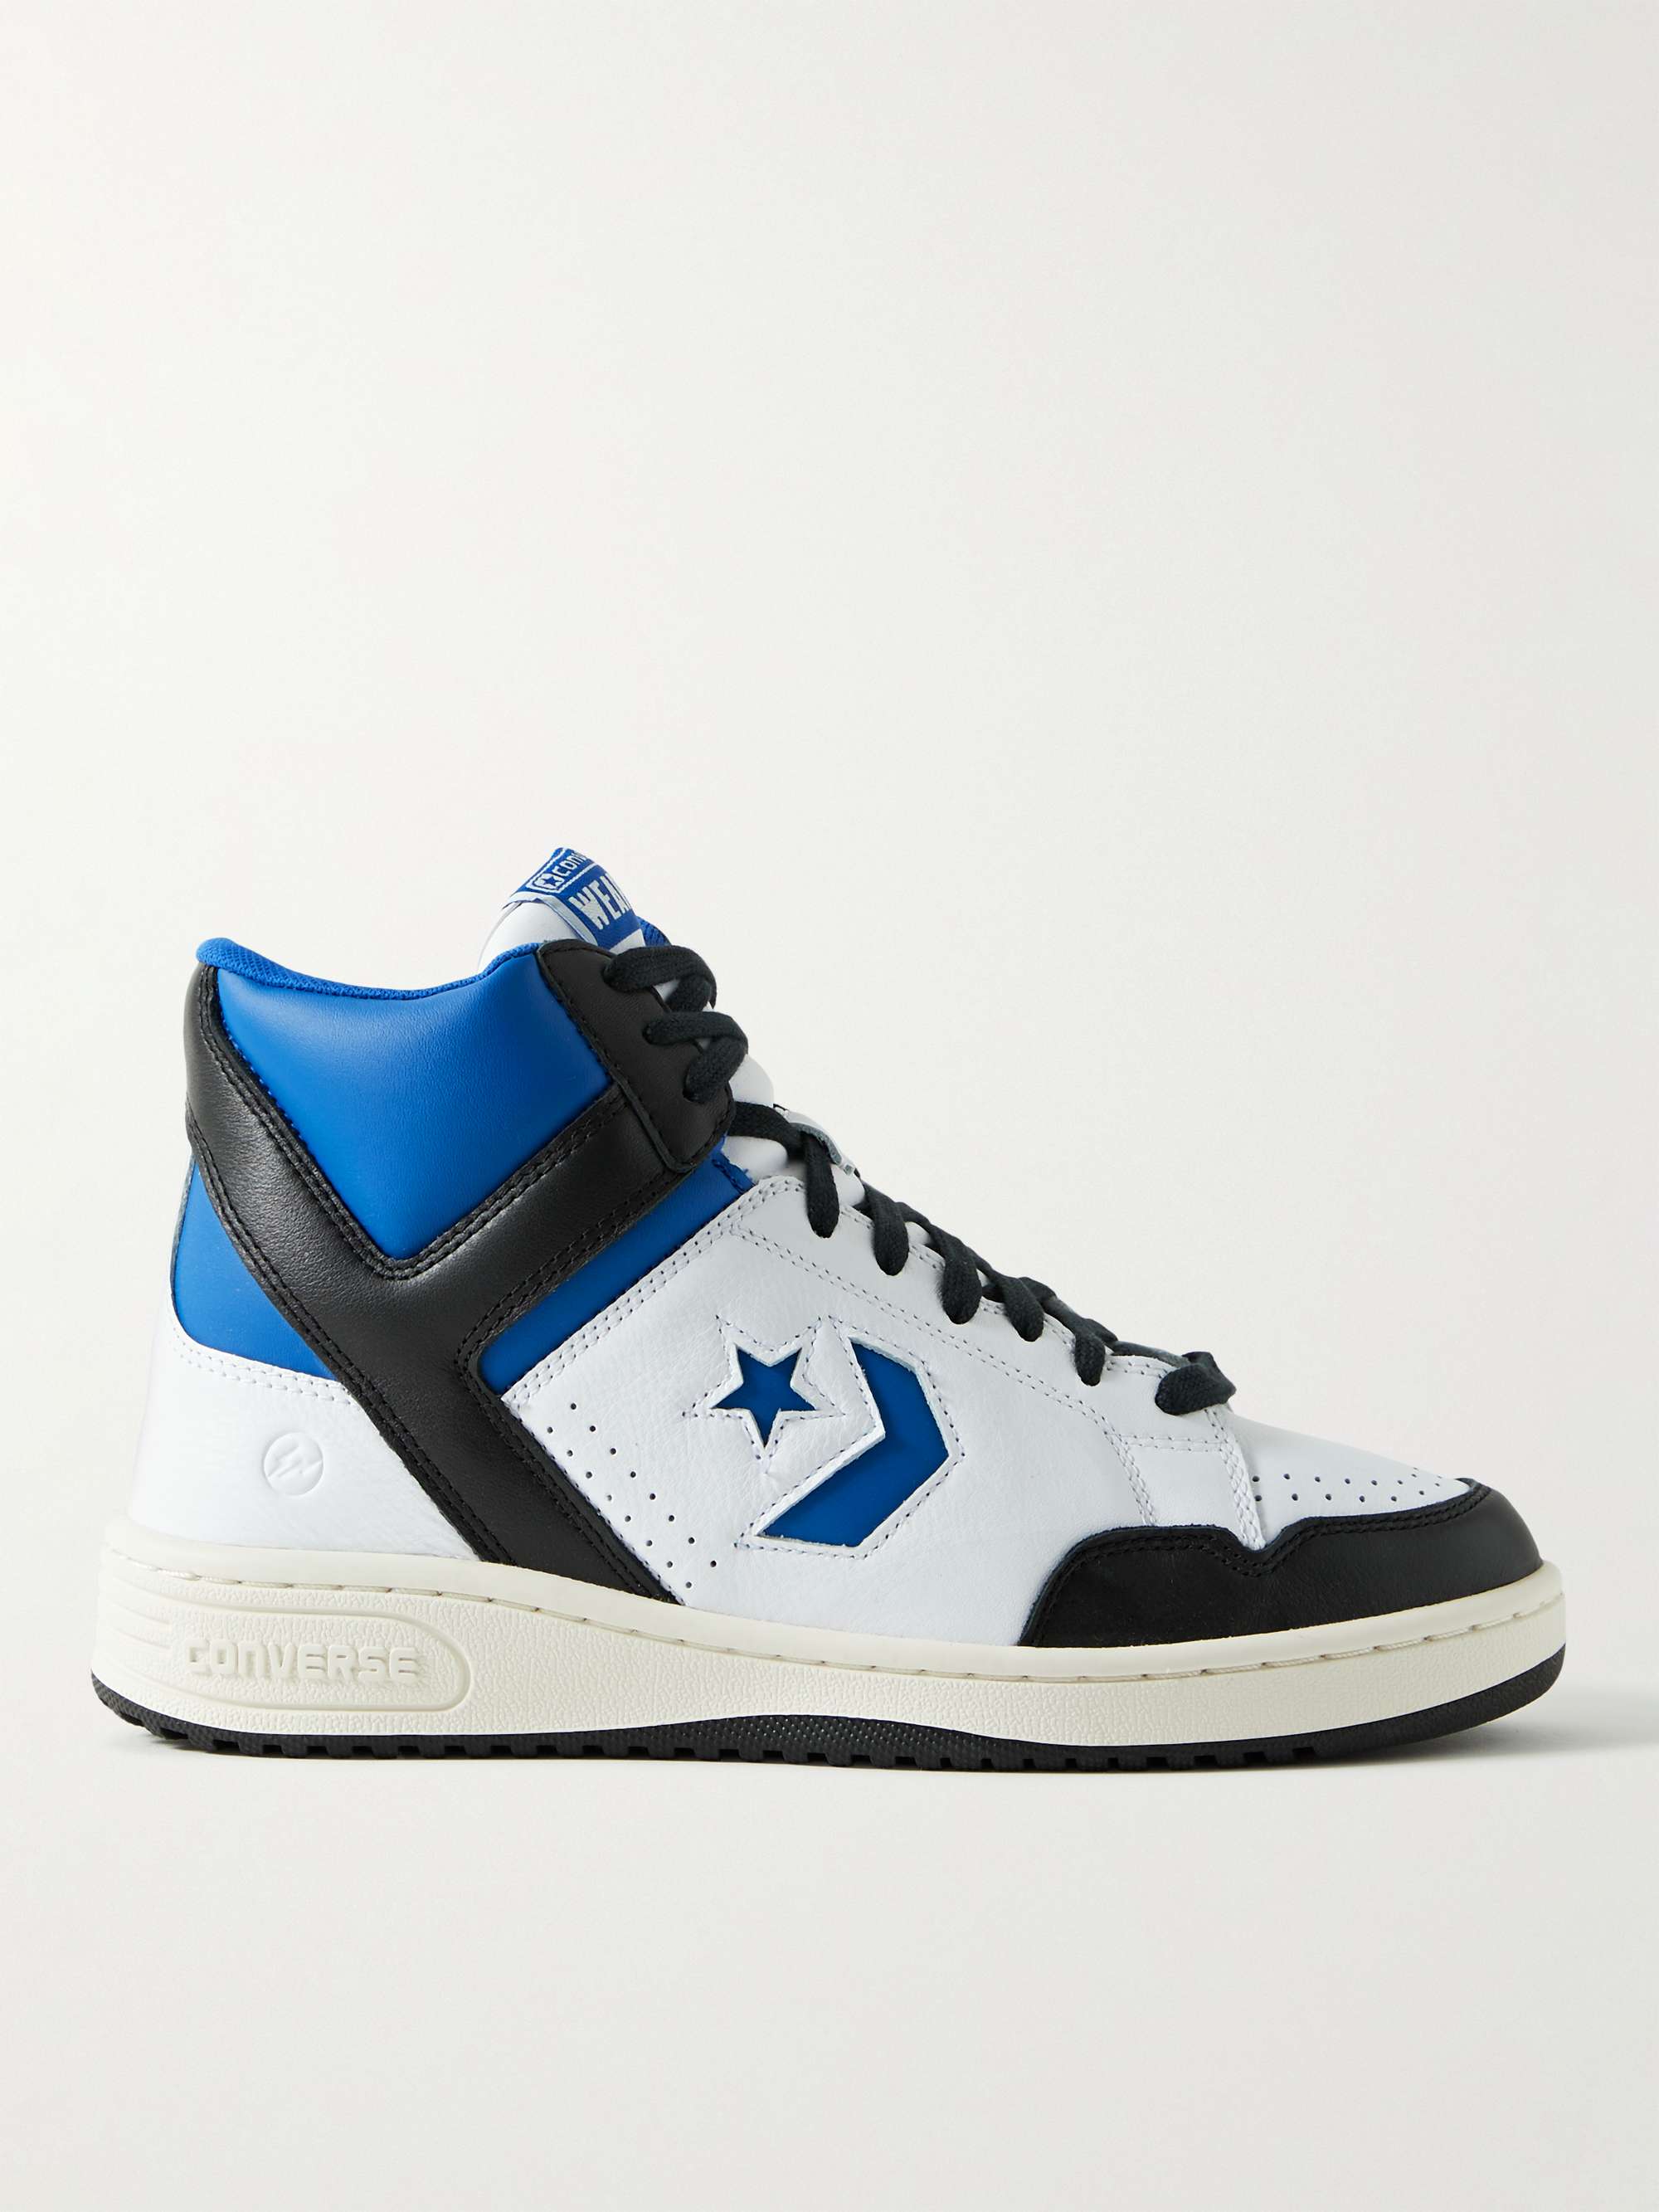 CONVERSE + Fragment Weapon Colour-Block Leather High-Top Sneakers for Men |  MR PORTER